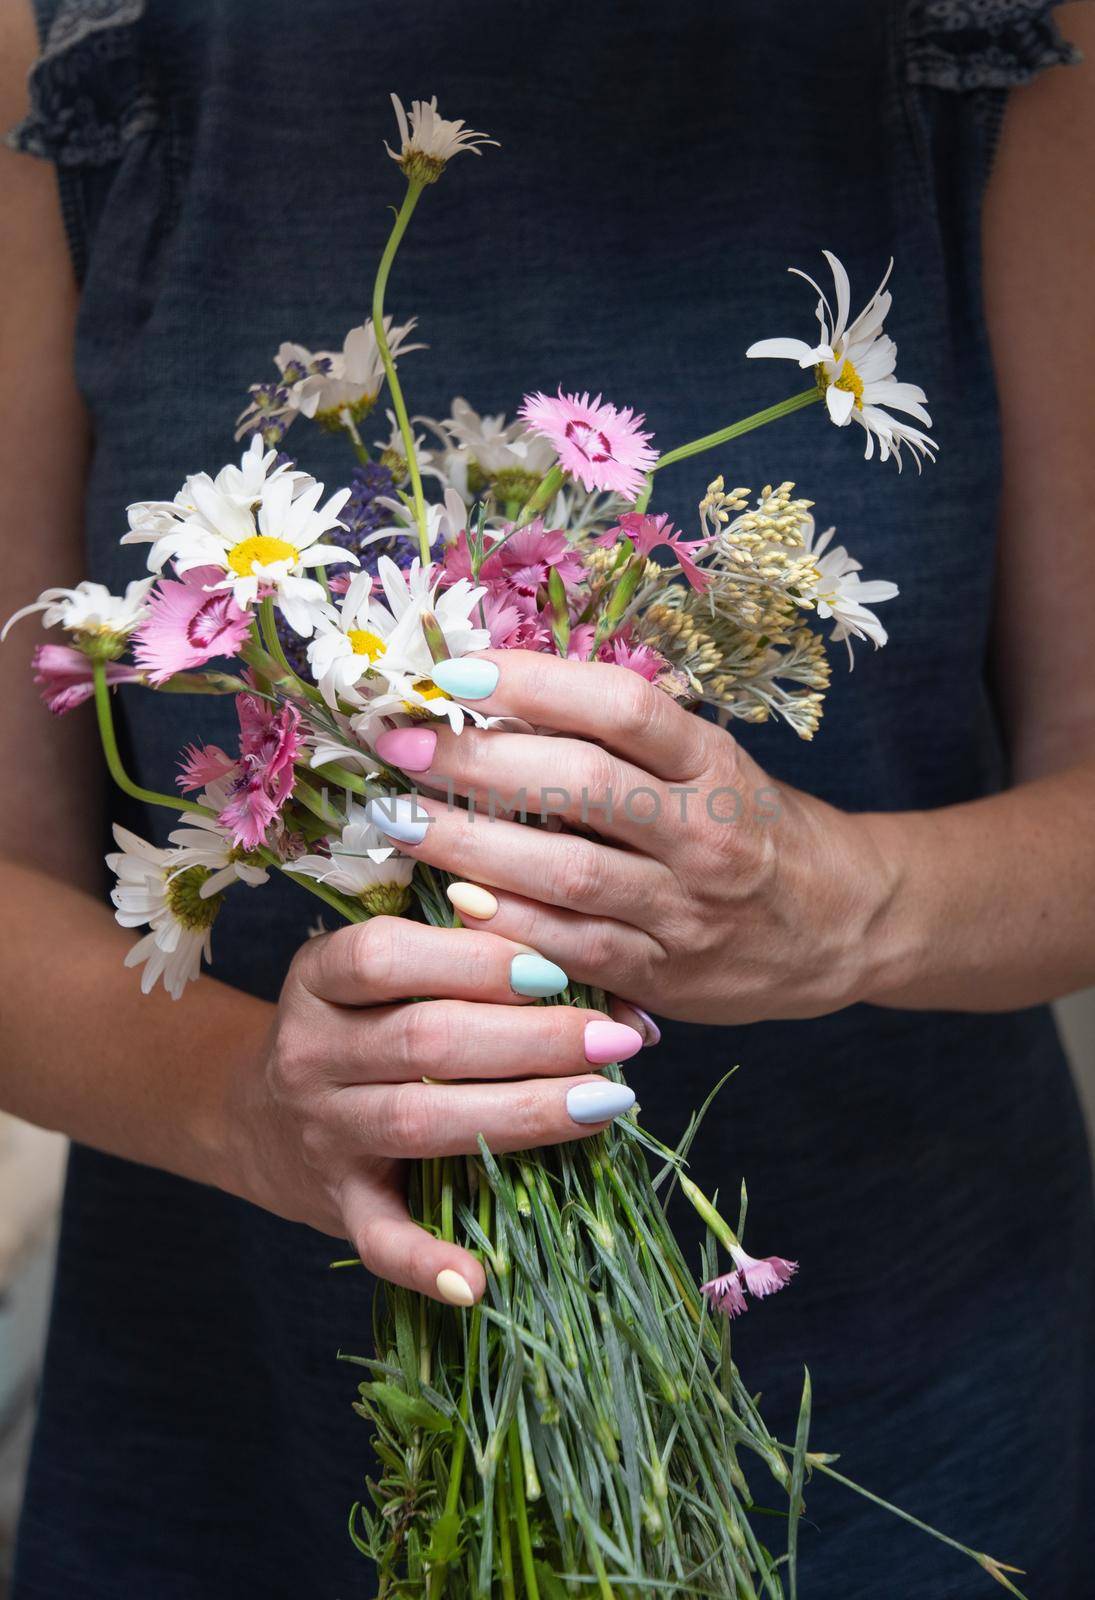 a young woman with a beautiful summer manicure holds a bouquet of wild flowers in pastel shades. High quality photo